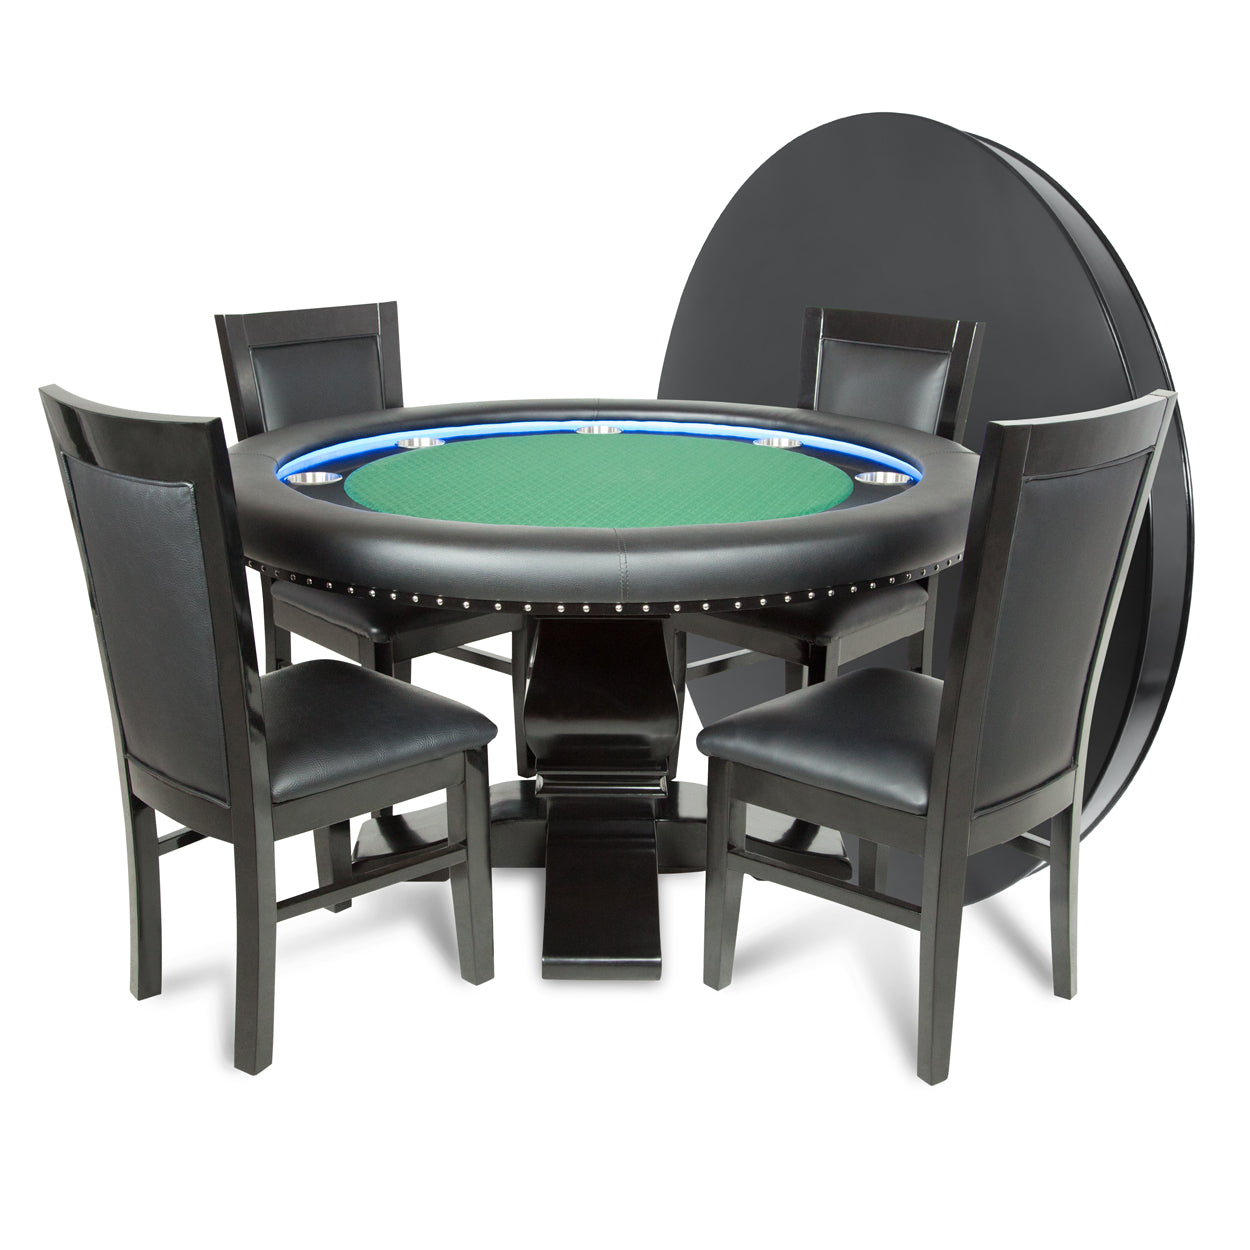 BBO The Ginza LED Premium Poker Table green speedcloth with dining top and chairs